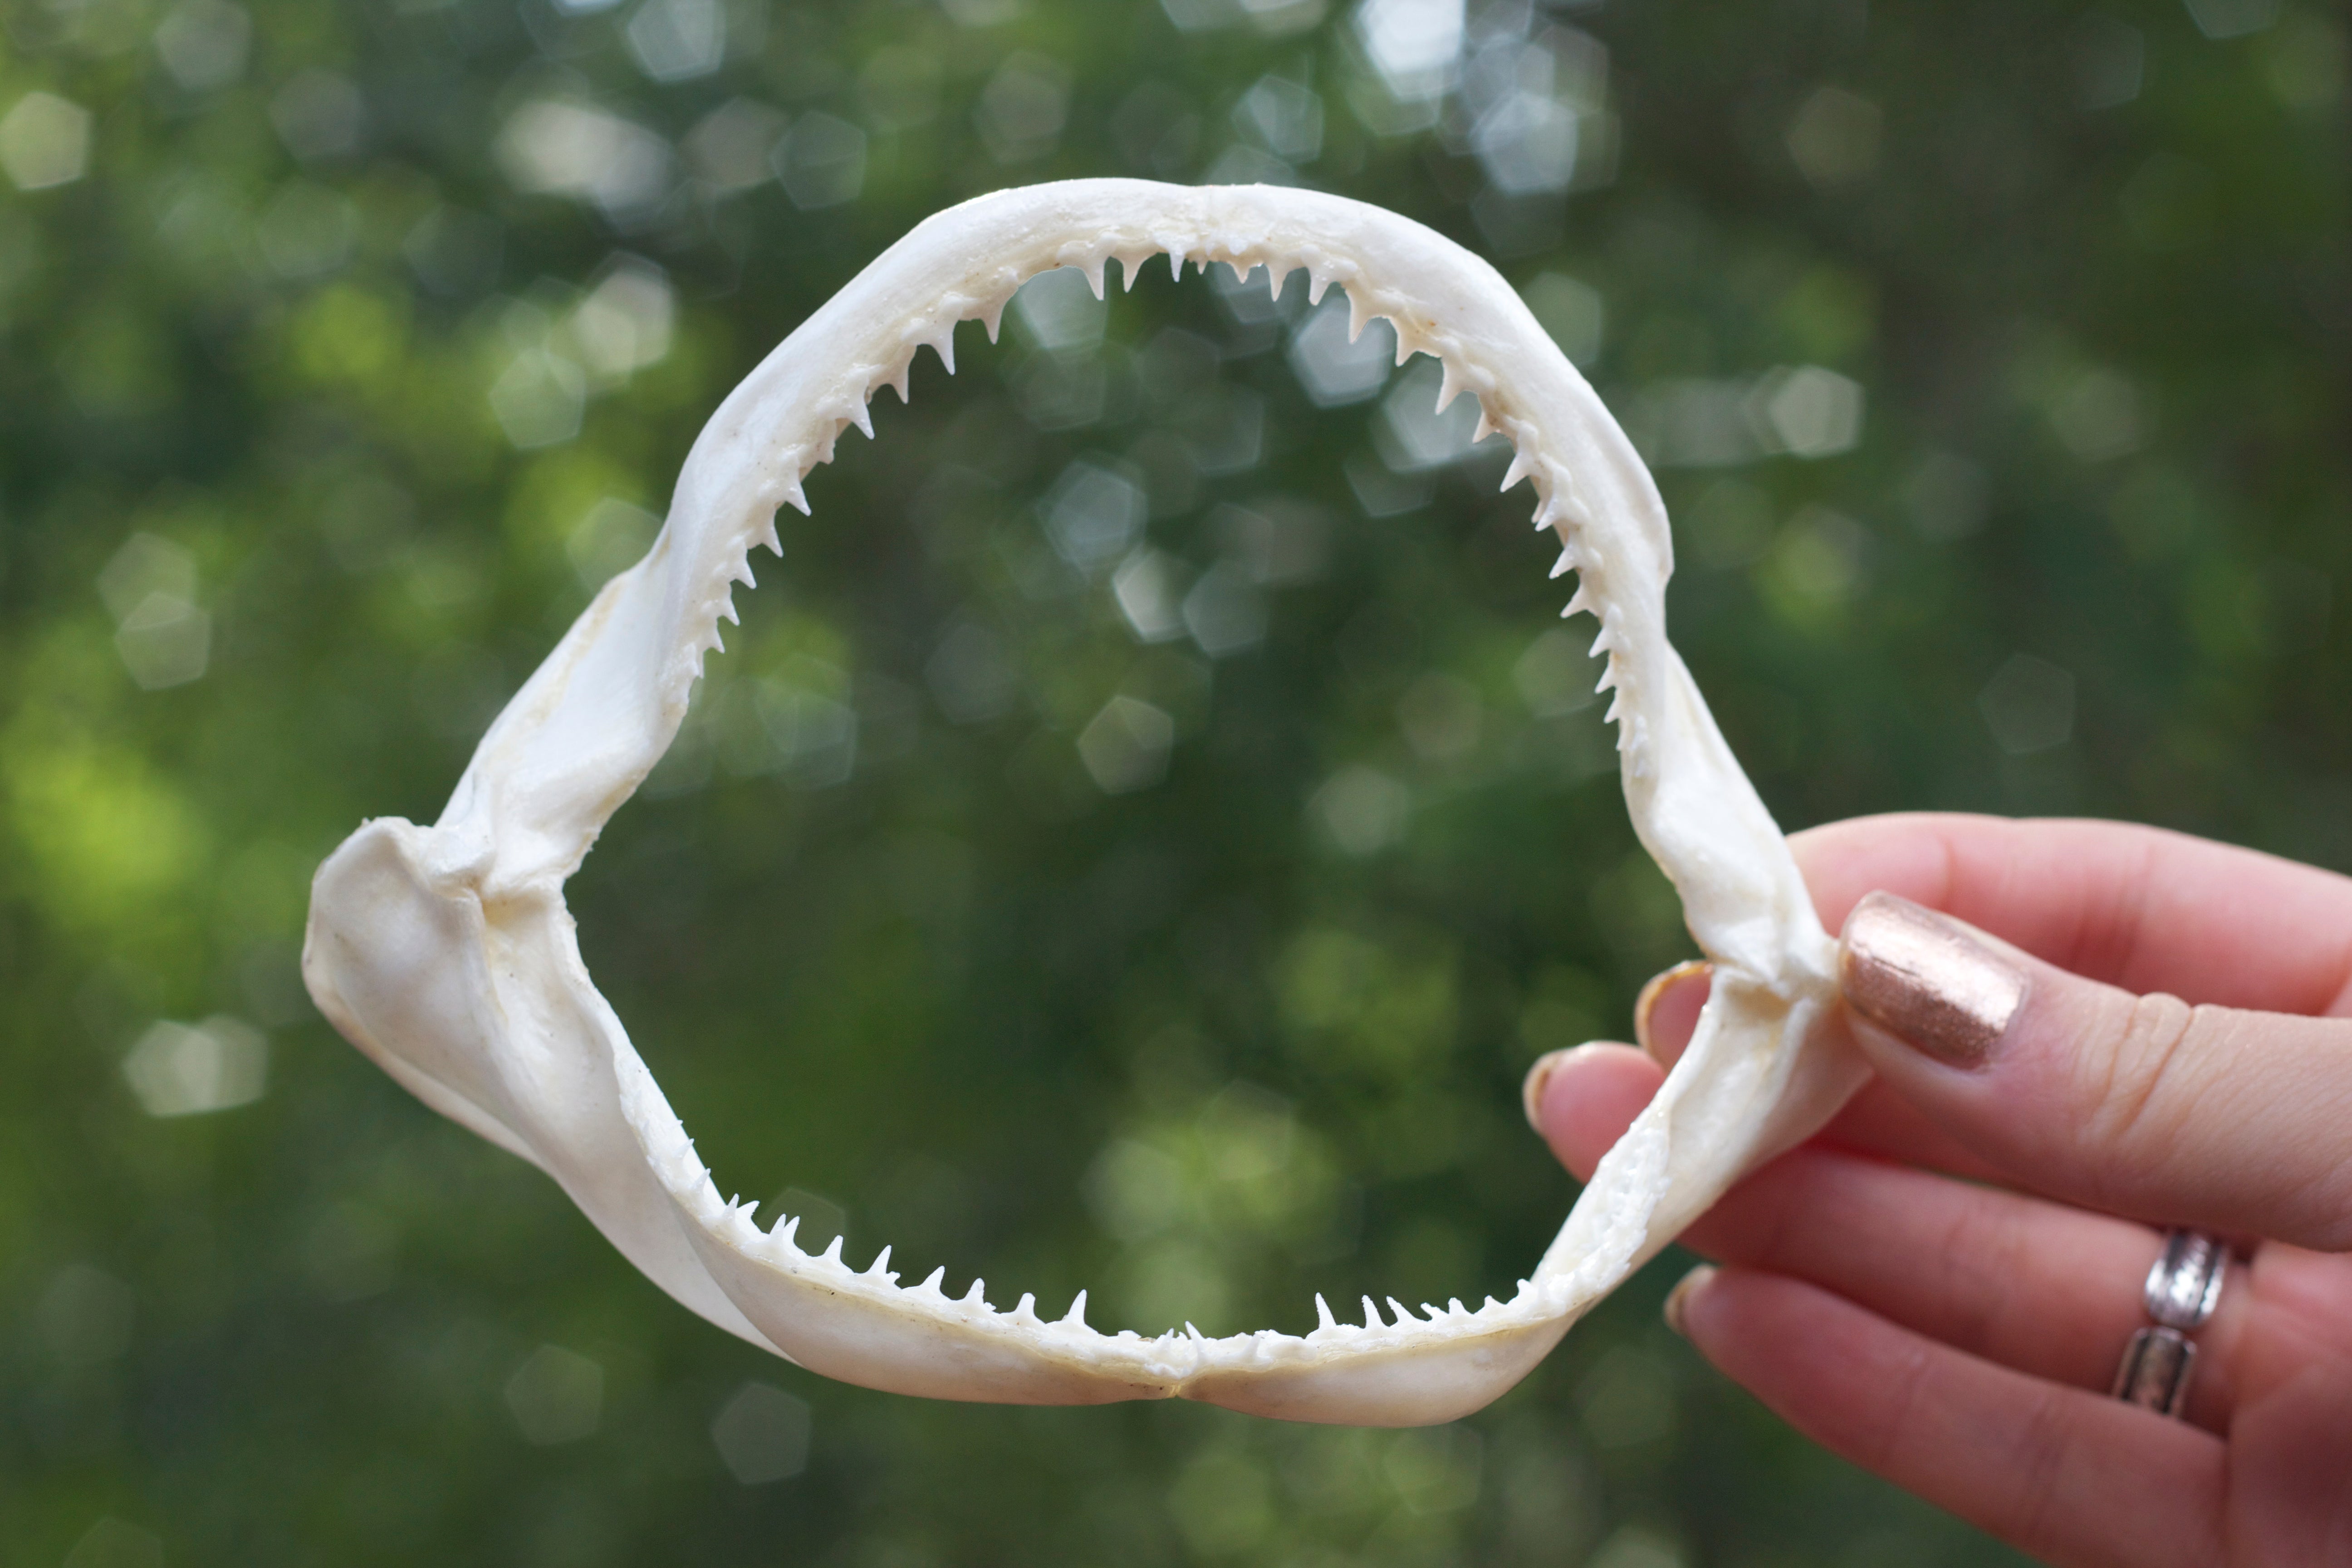 How to Clean a Shark Jaw?